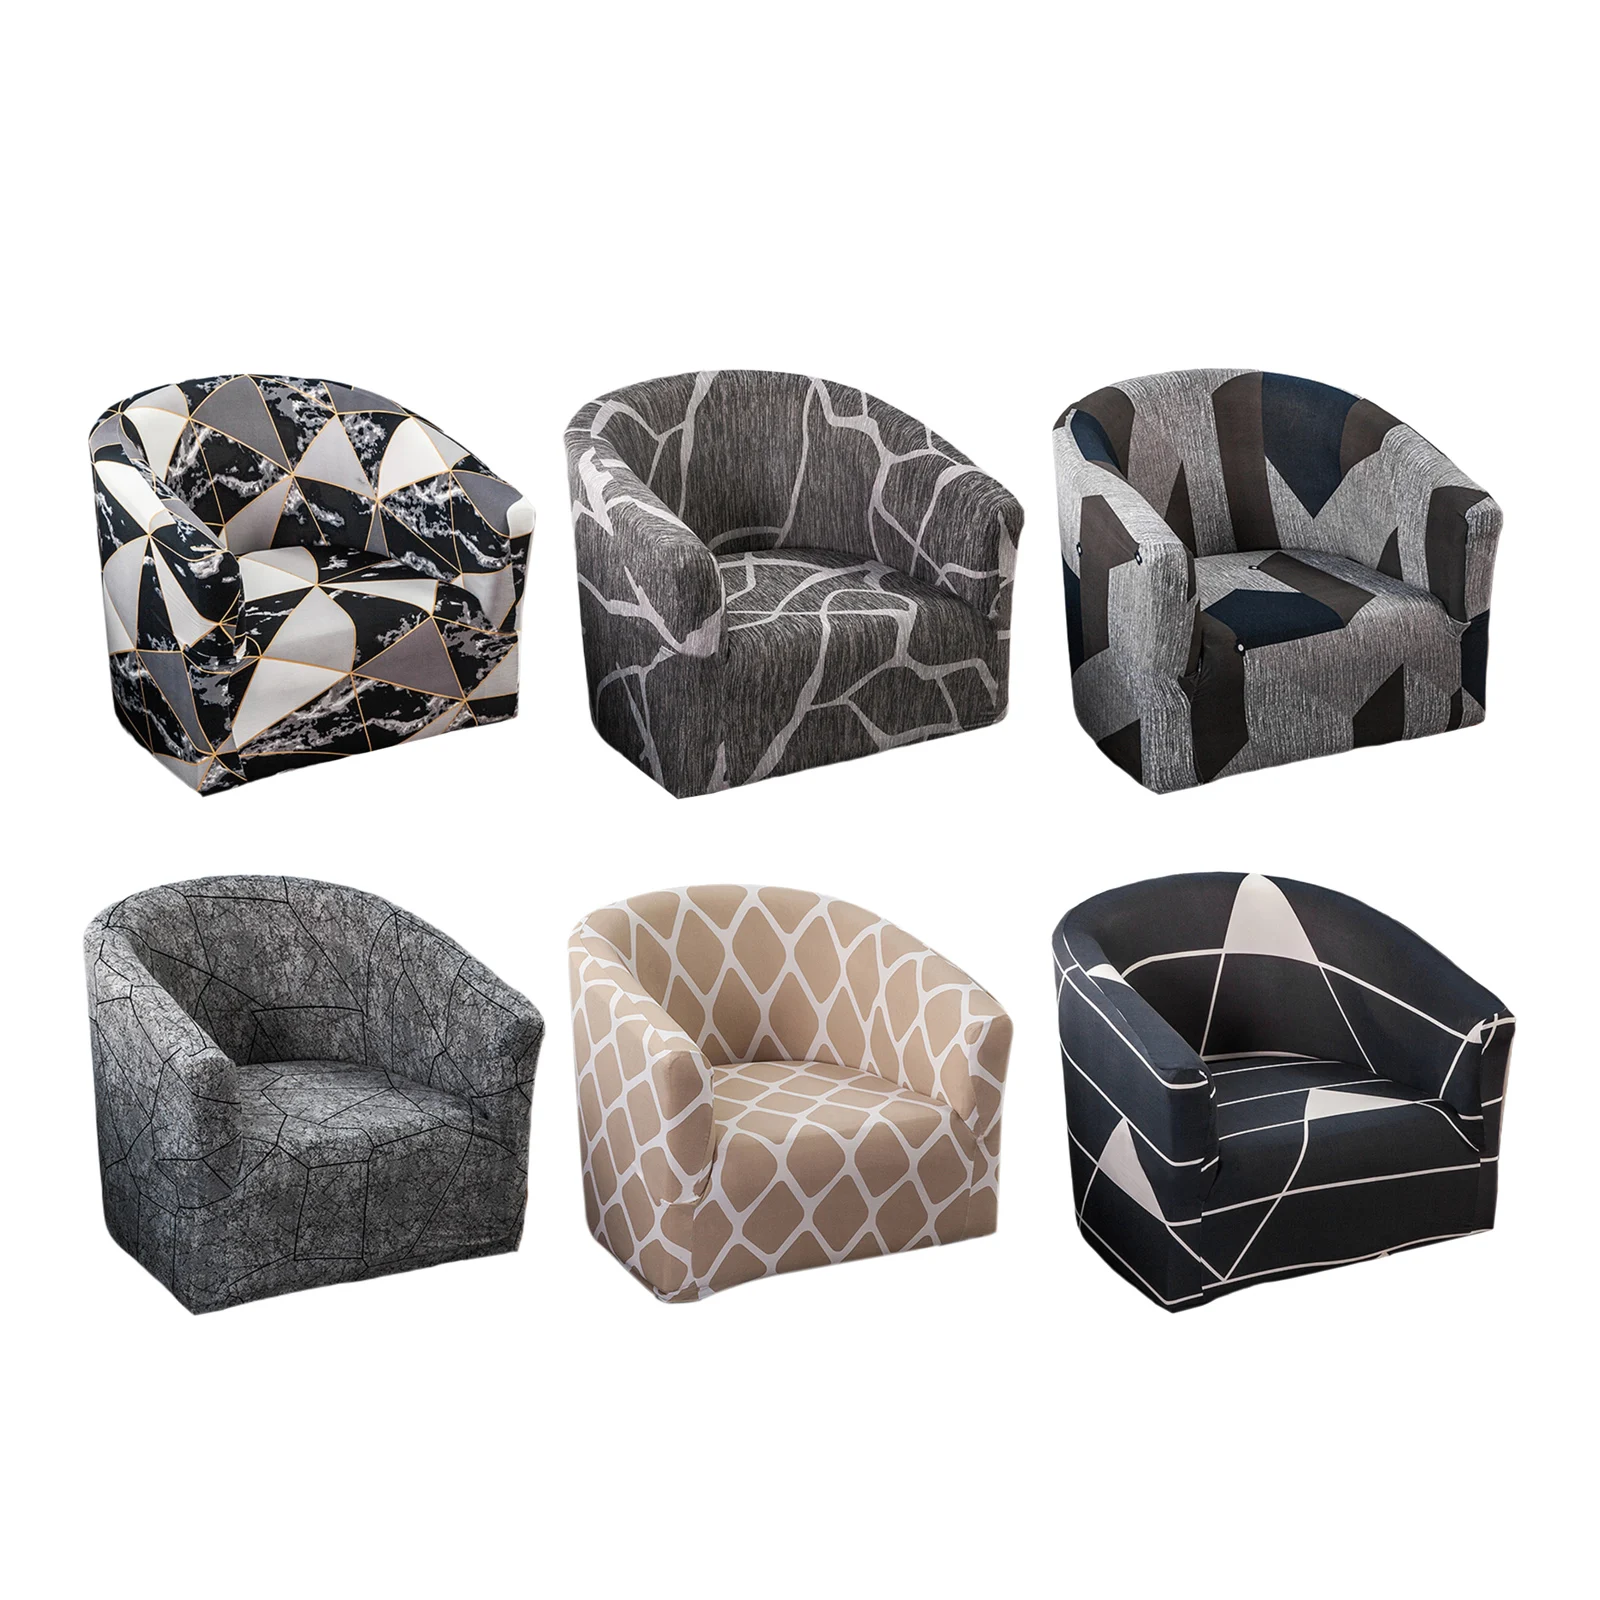 Printed Club Chair Slipcover Non-Slip Anti-slip Elastic Stretchable Arm Chair Cover Couch Slipcover